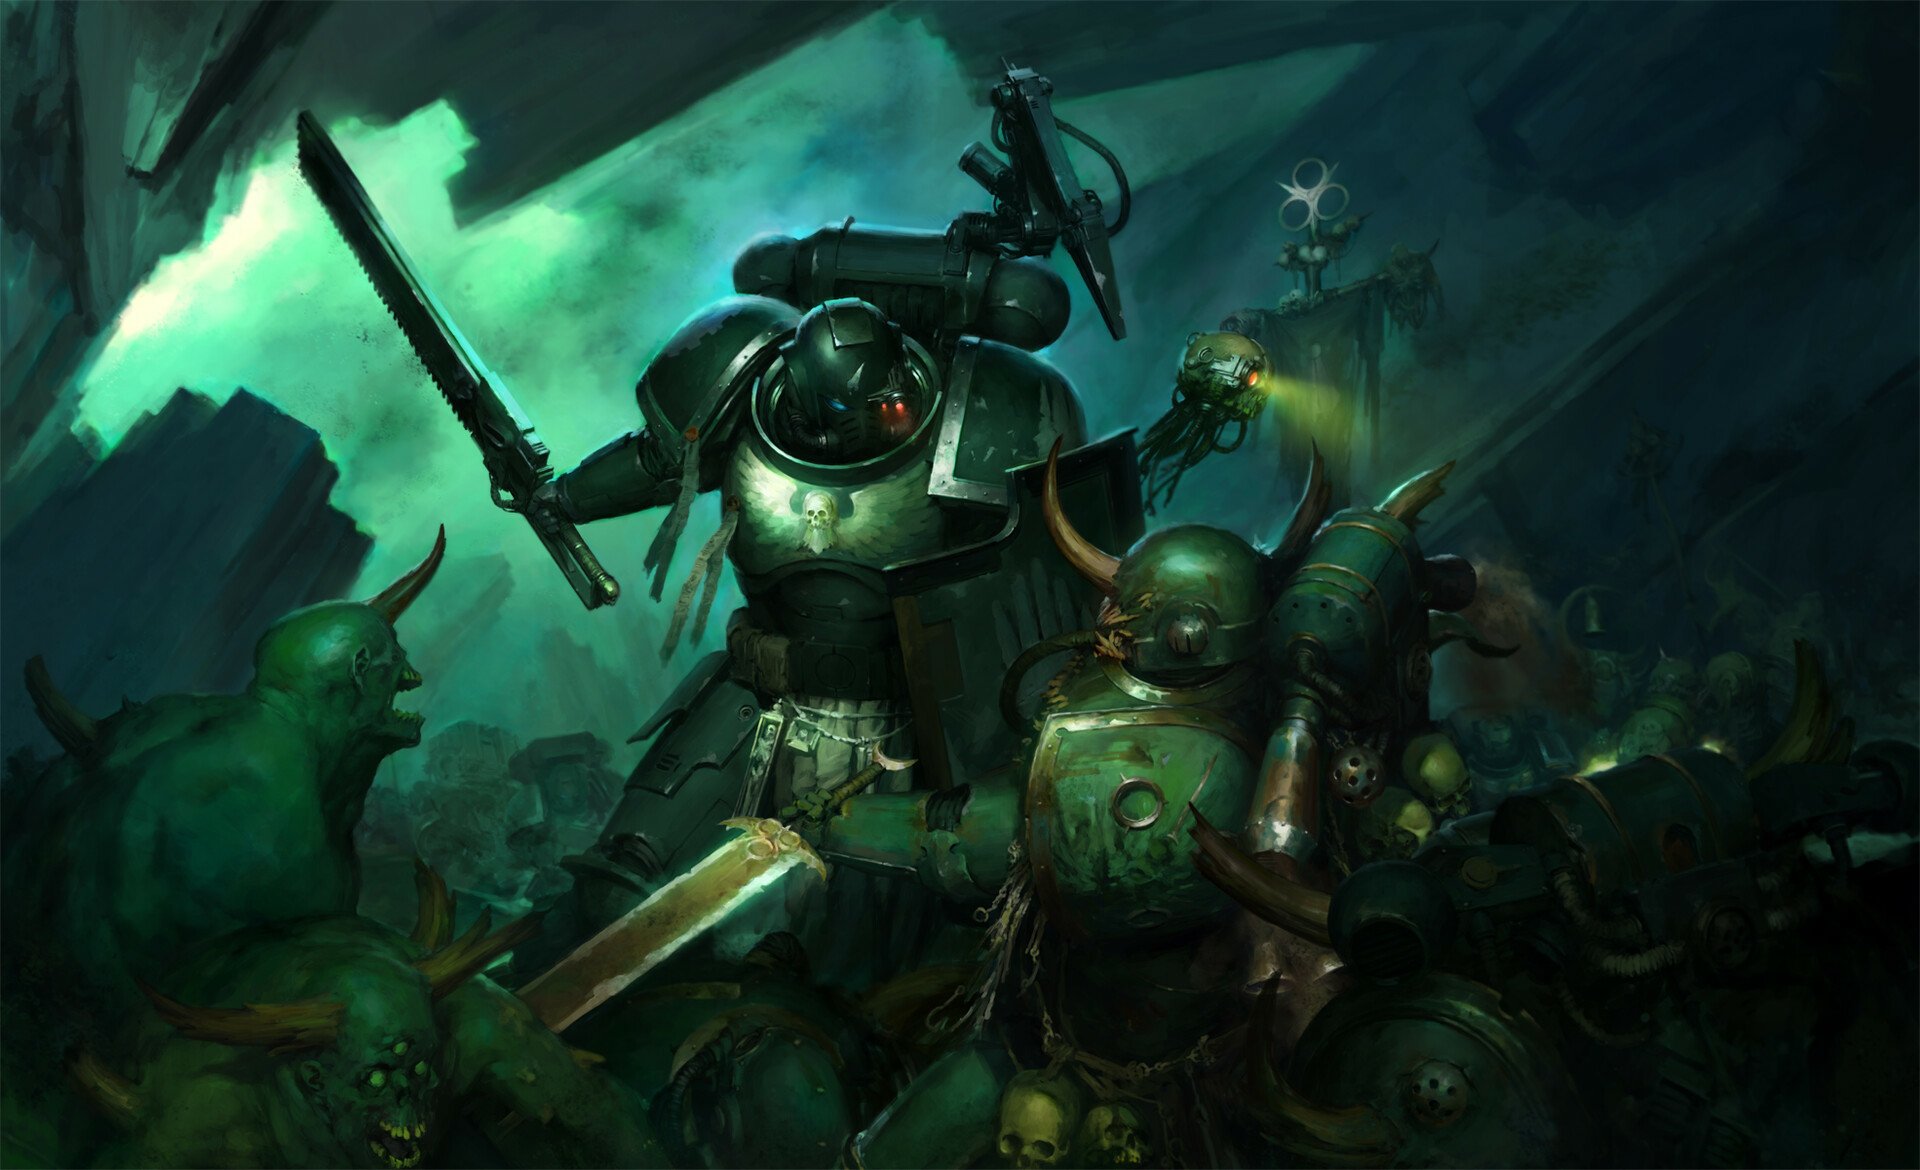 Death Guard Wallpaper 1920x1080 - IMAGESEE